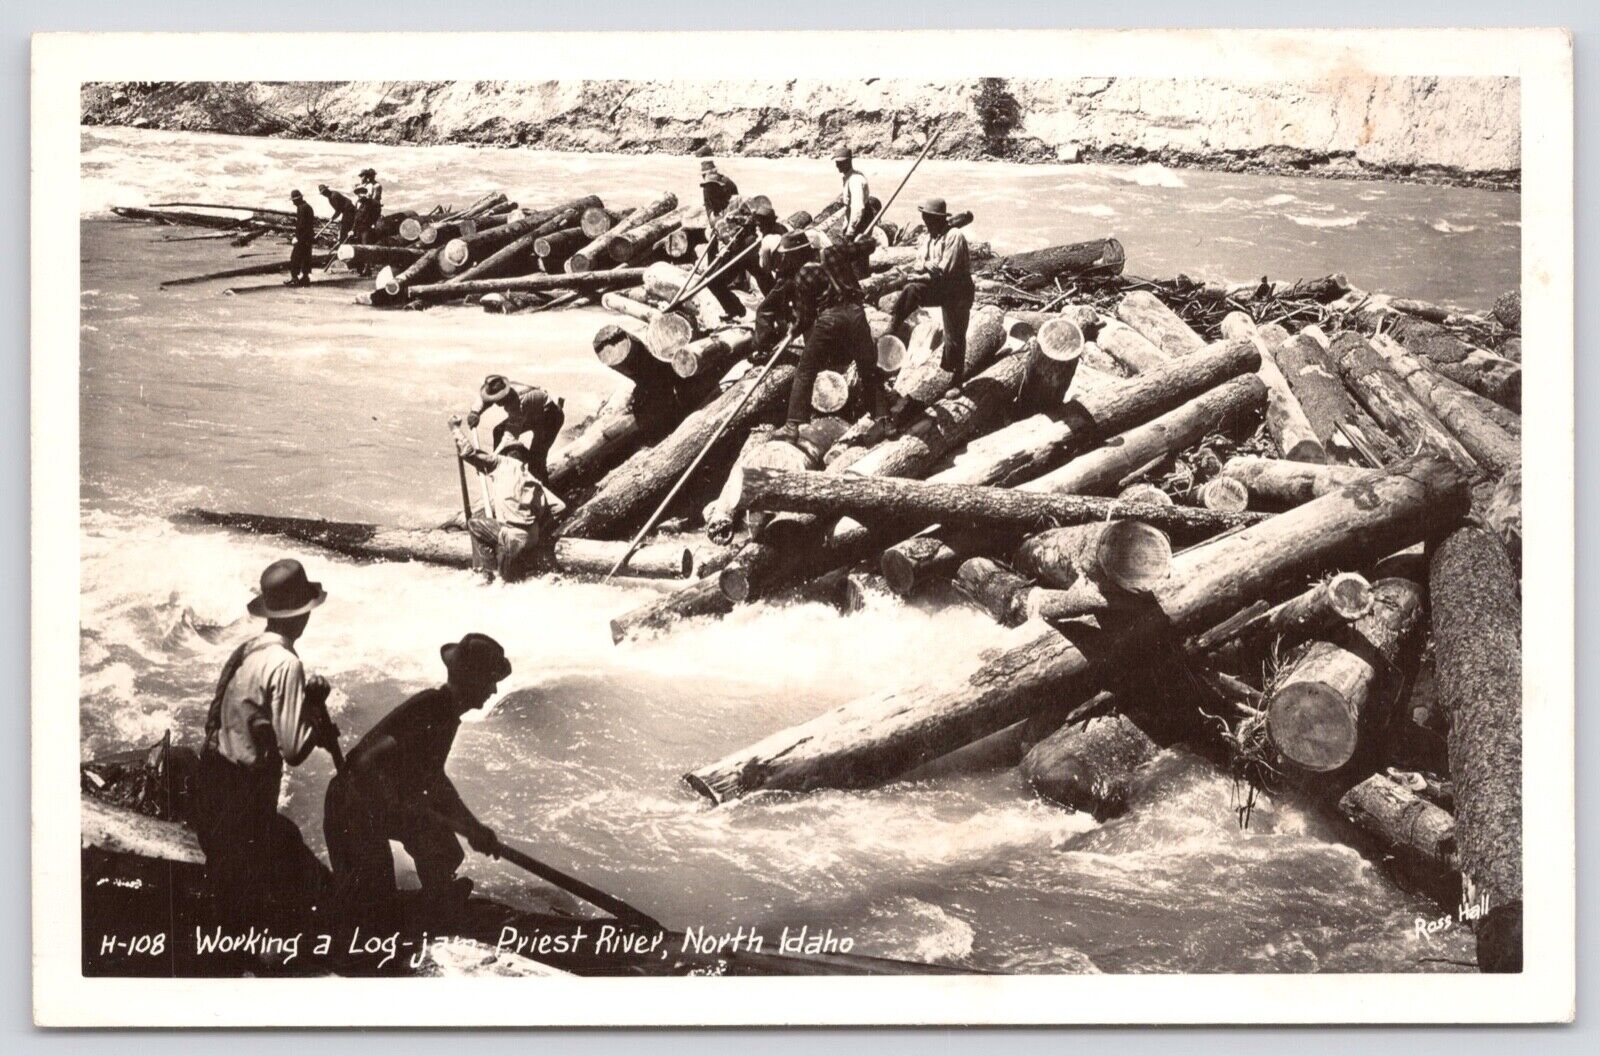 Postcard RPPC Men \'Working a Log-Jam\' on the Priest River in North Idaho c1940s